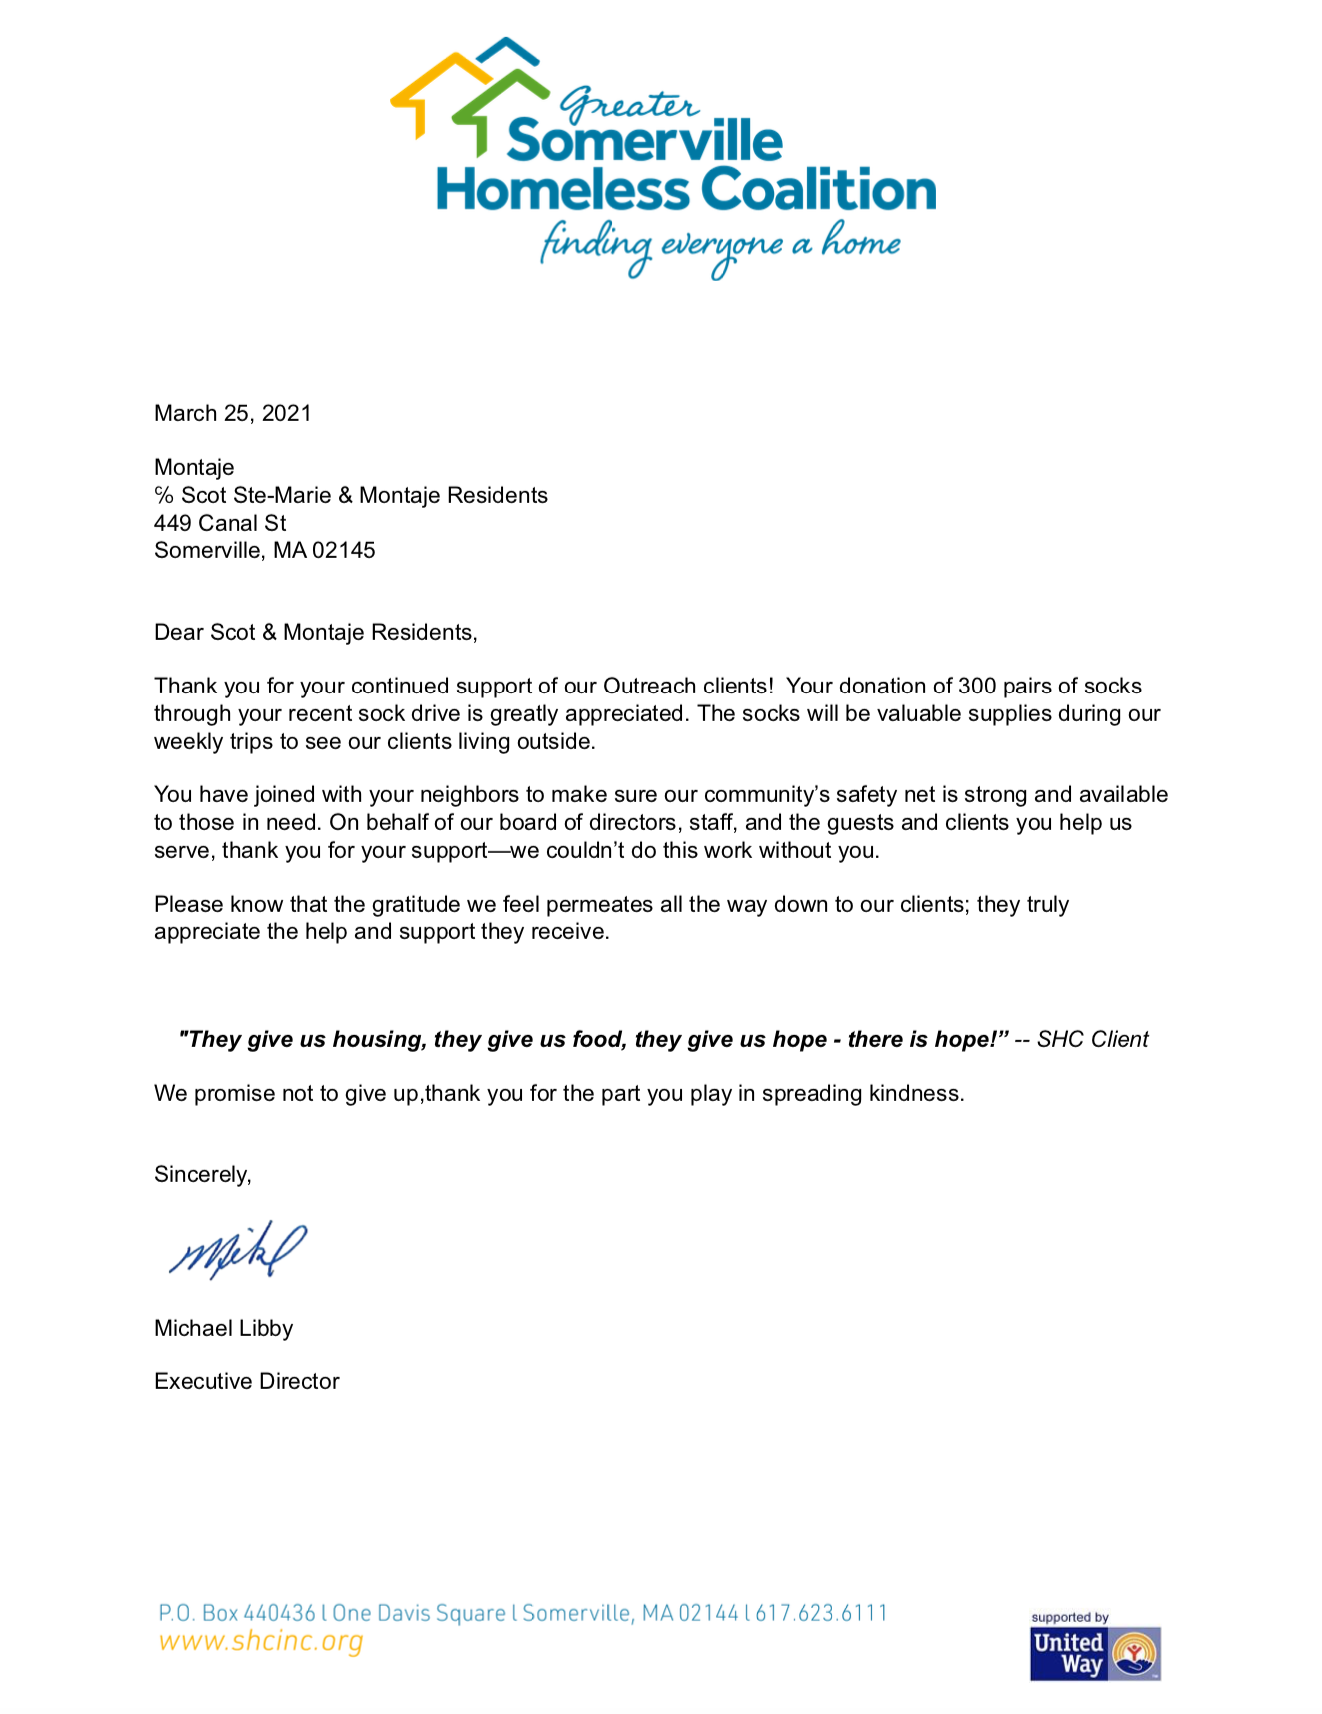 thank you letter from summerville homeless coalition